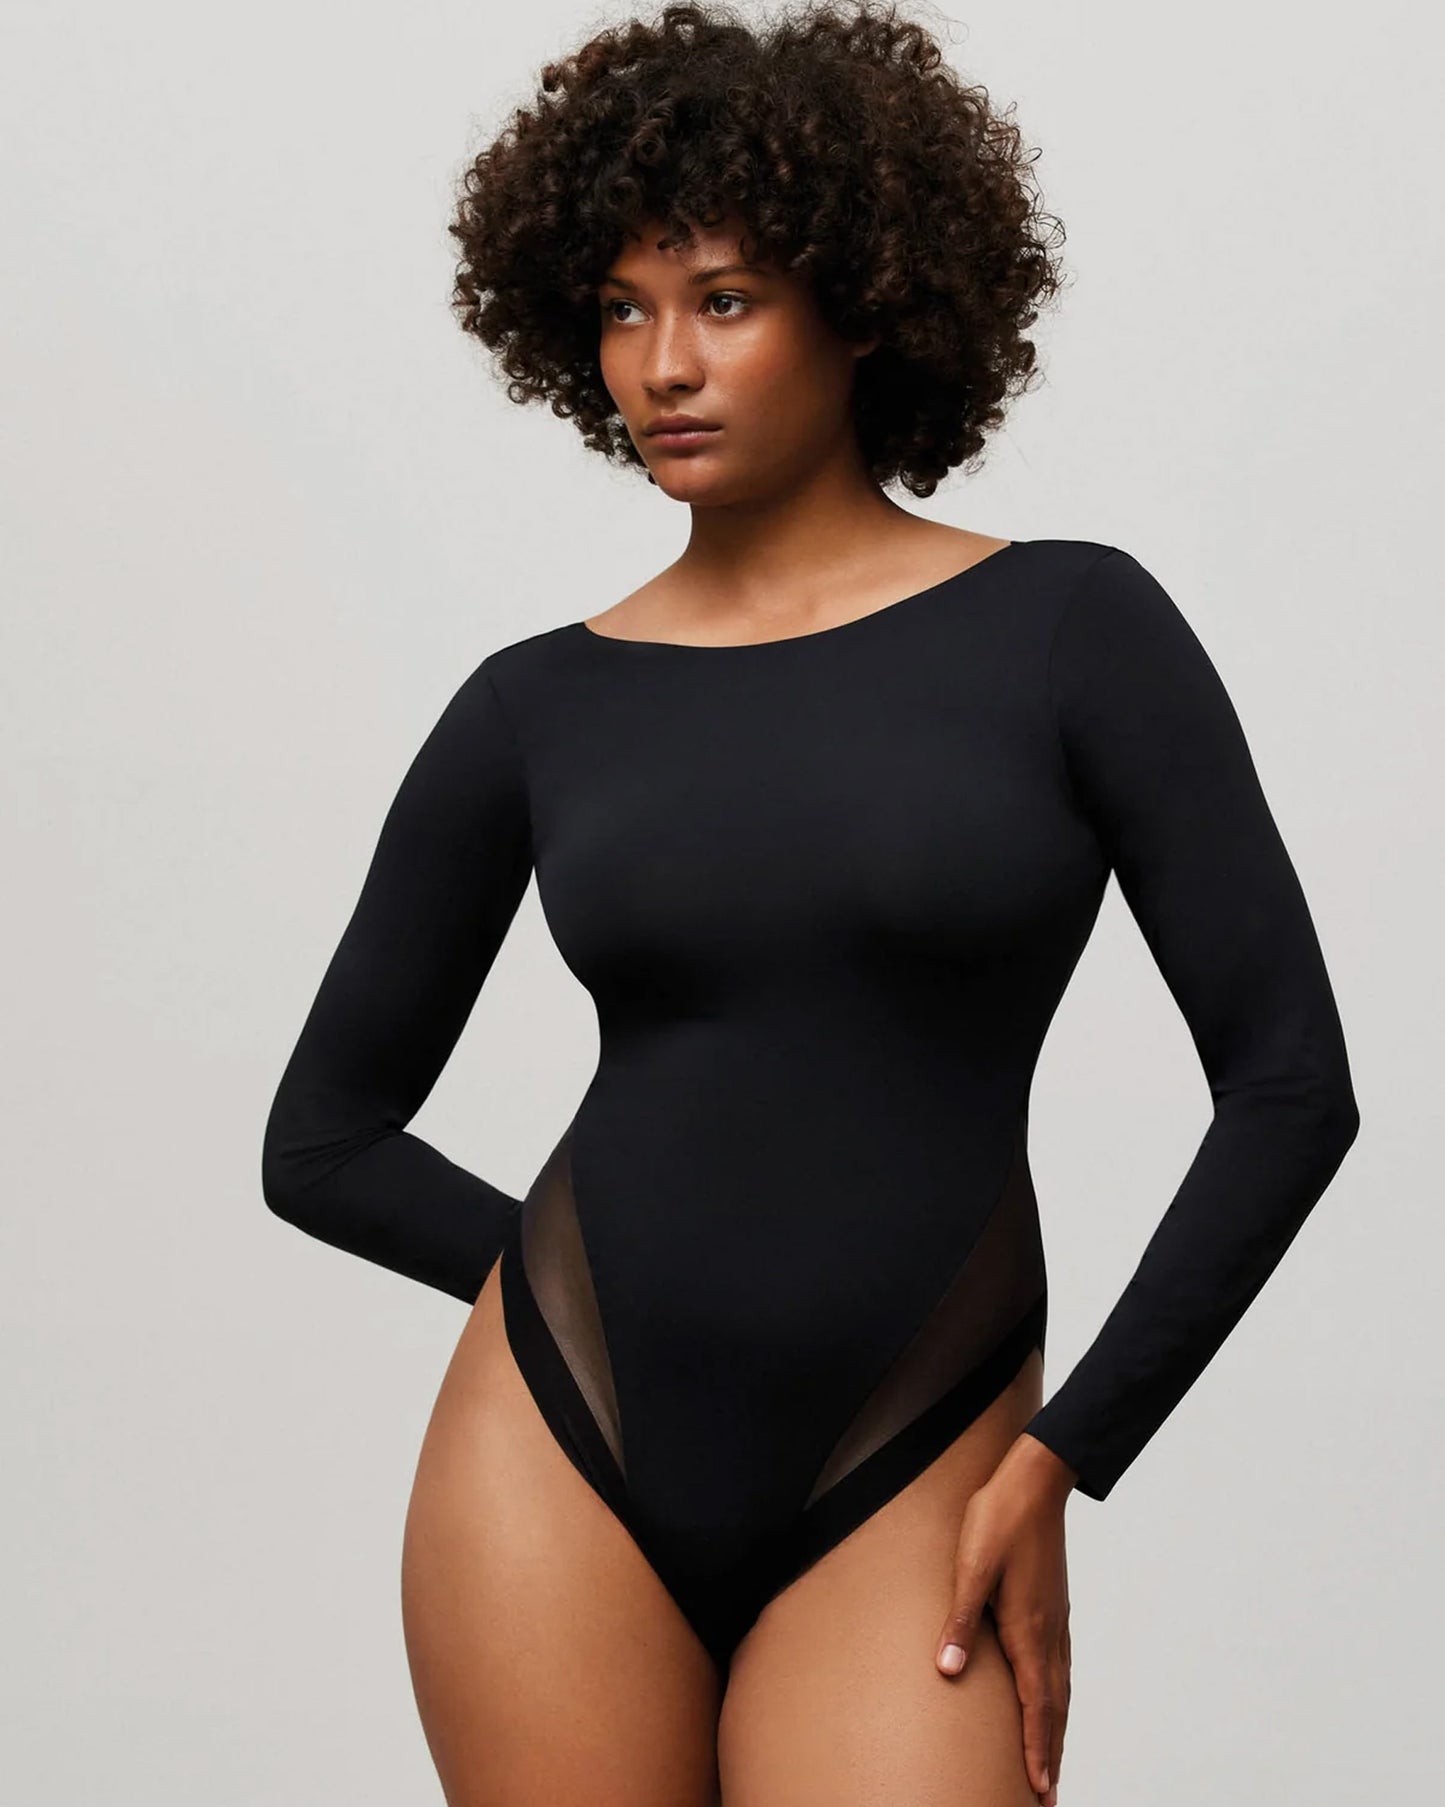 Ysabel Mora 10055 Scoop Back Body-Top - Black slinky and stretchy body-suit with a high neck line, low scooped back, sheer tulle panels around the leg and snap fastener closures.